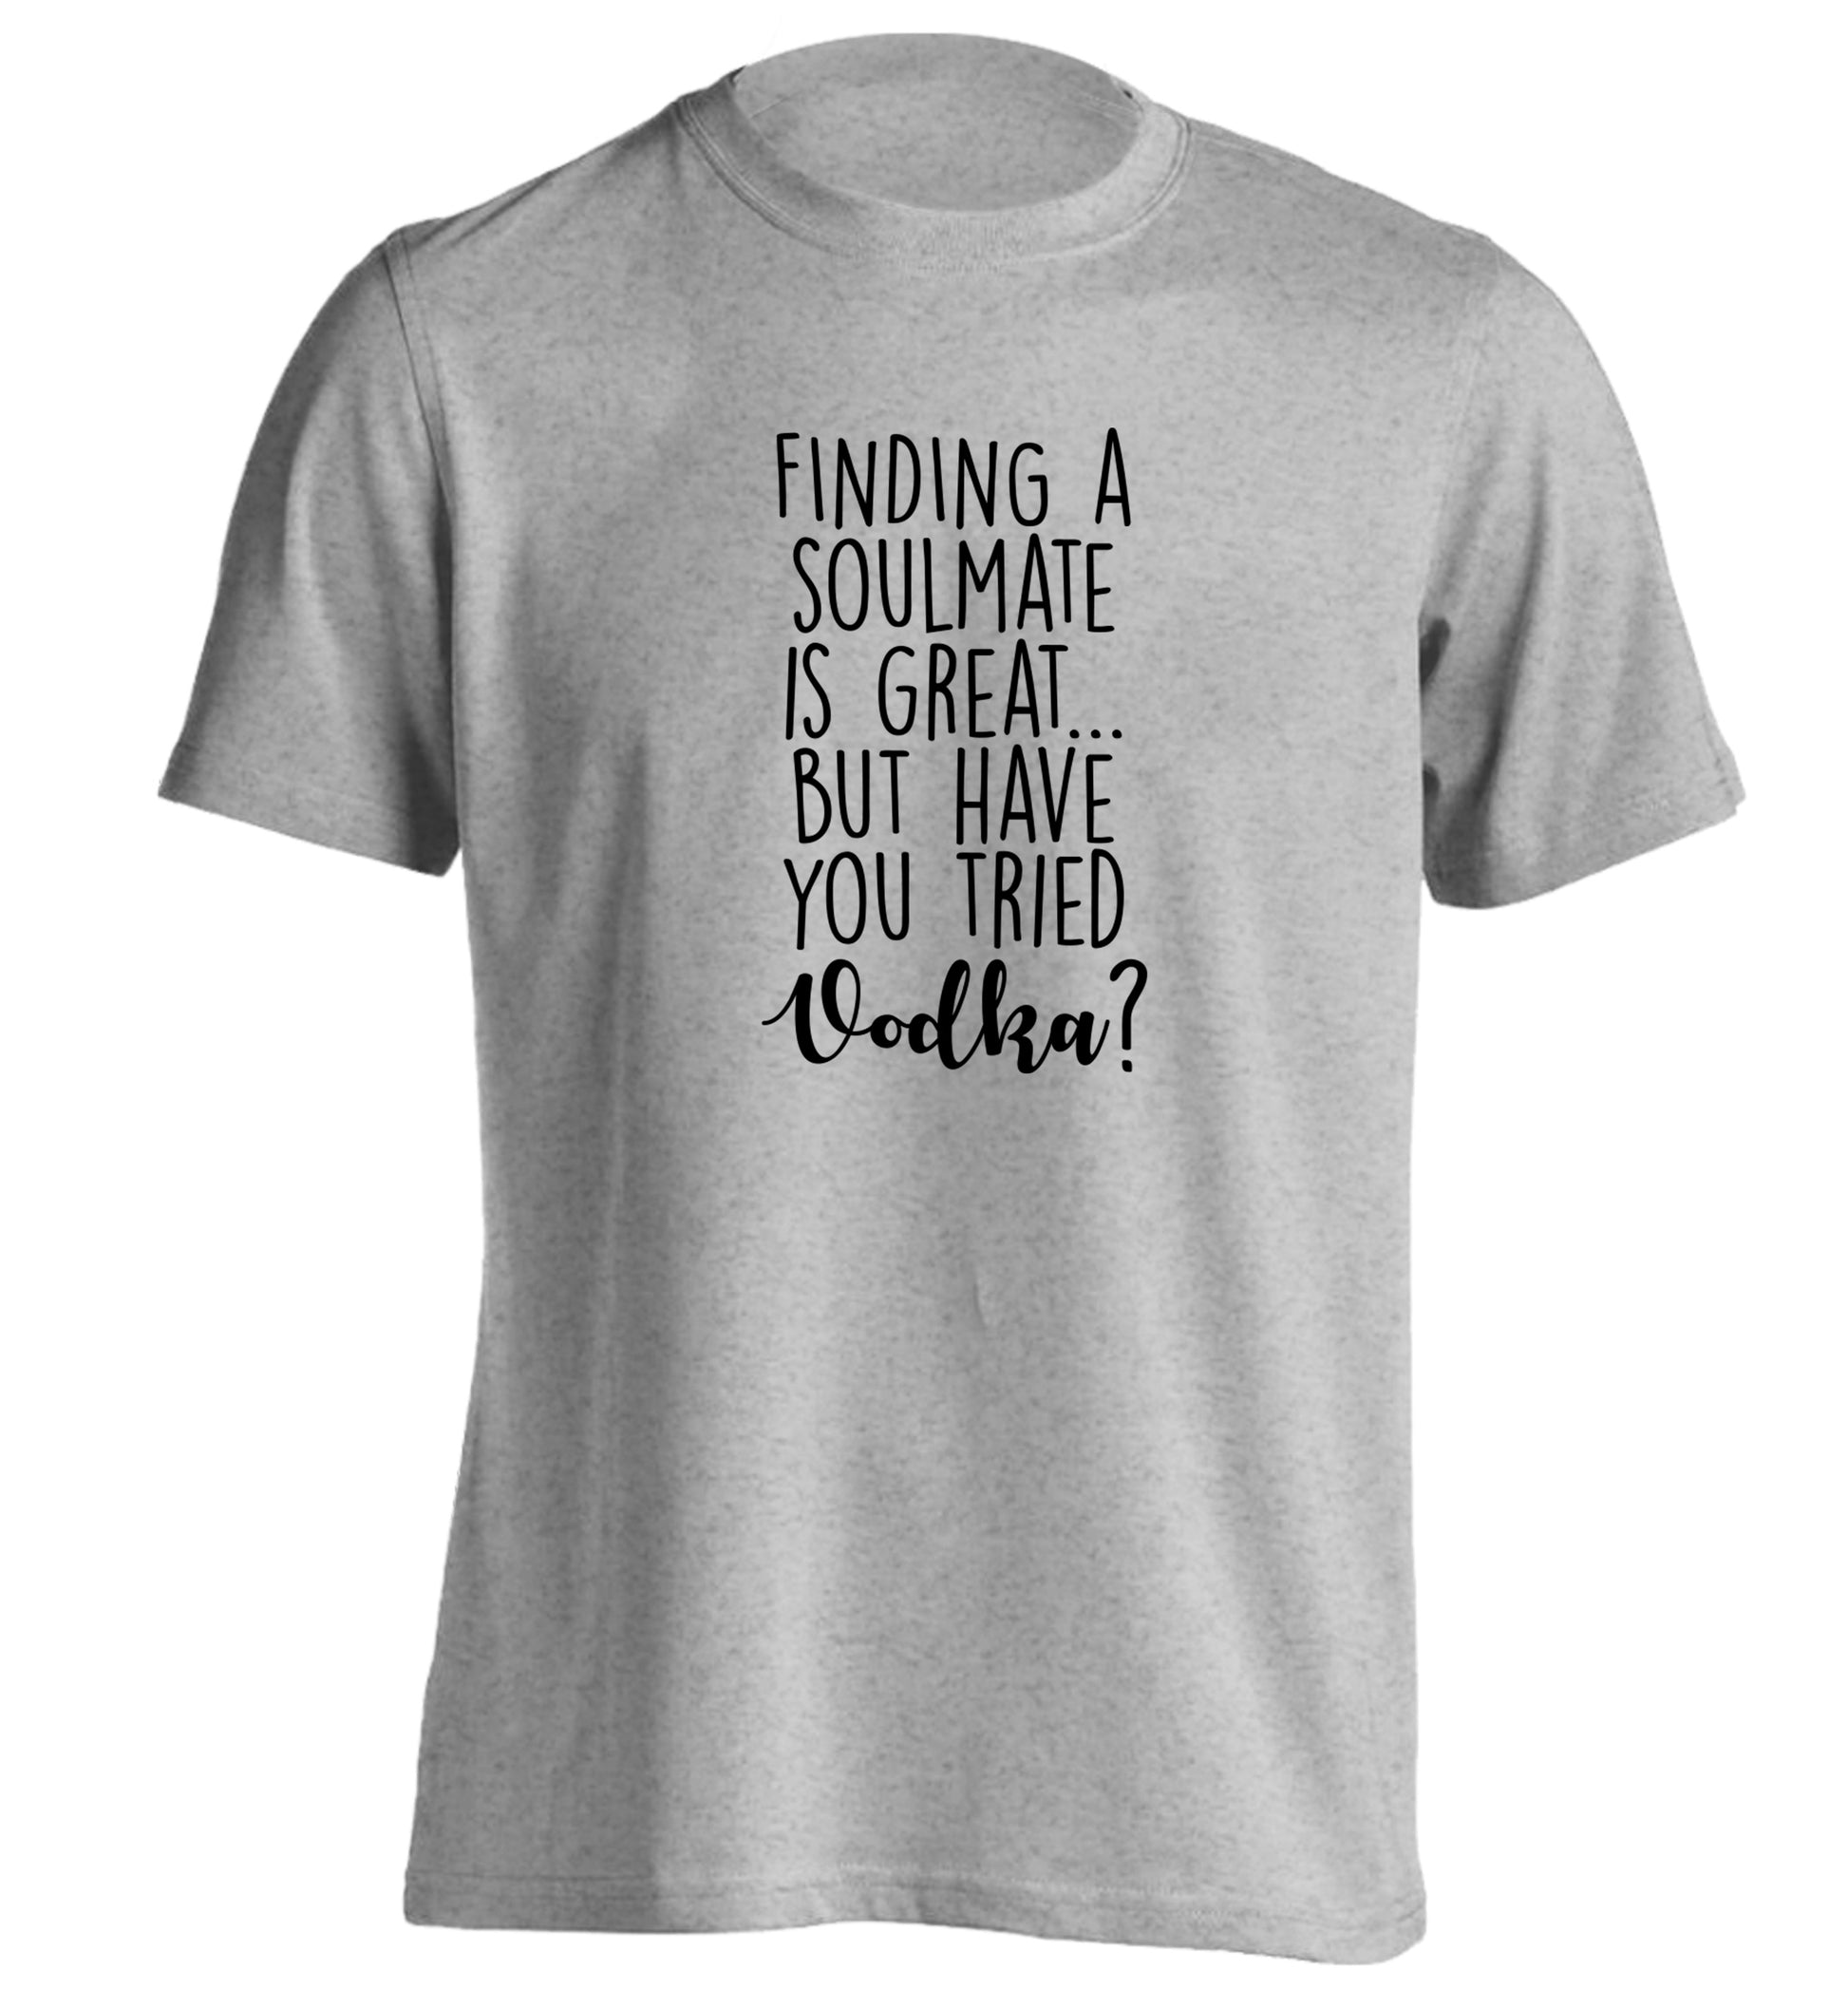 Finding a soulmate is great but have you tried vodka? adults unisex grey Tshirt 2XL